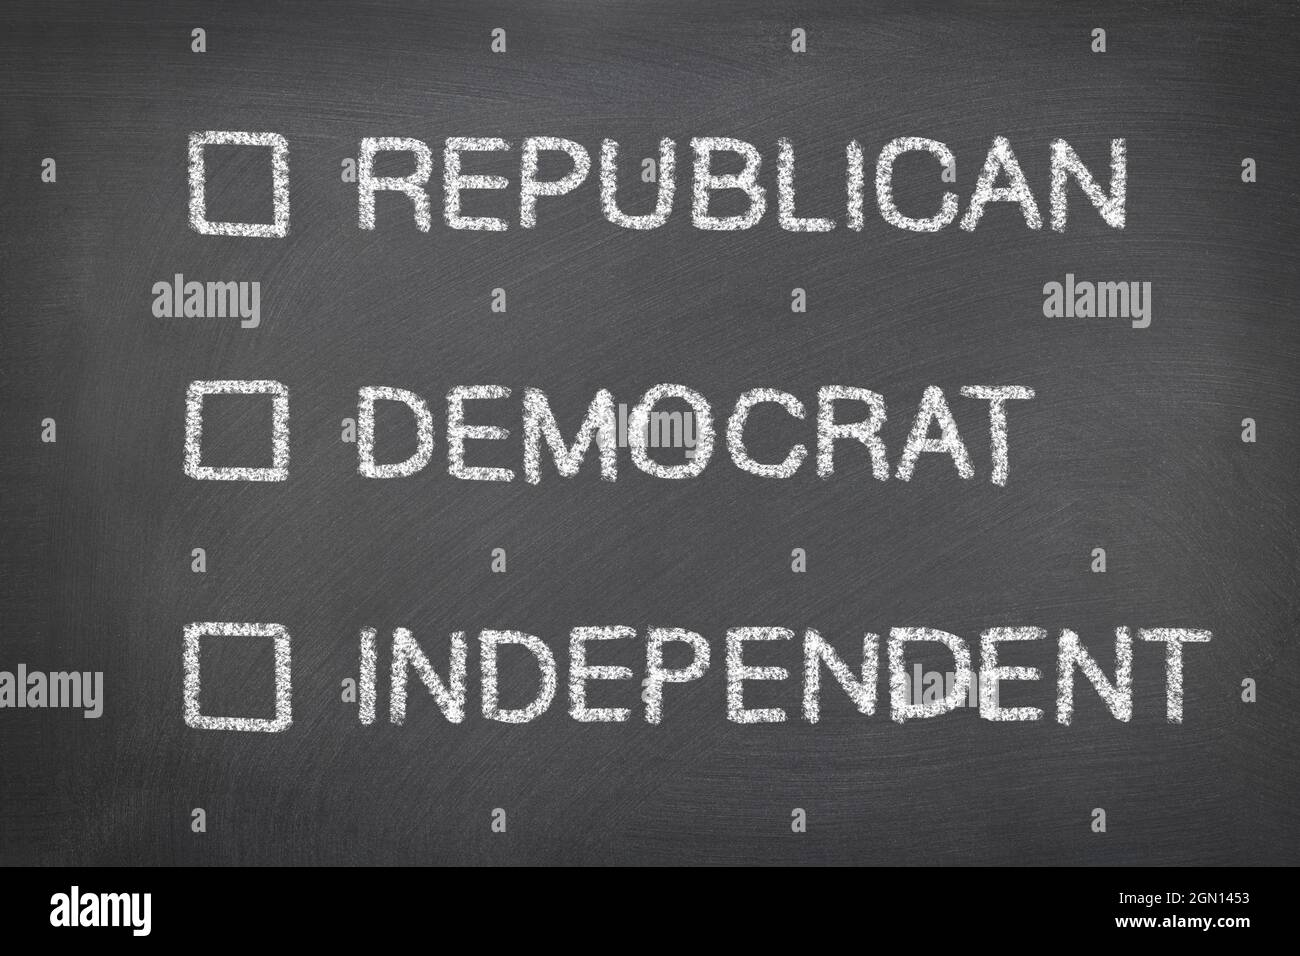 A blackboard with chalk written political party choices, including republican, democrats and independents. Includes check boxes left empty for designe Stock Photo